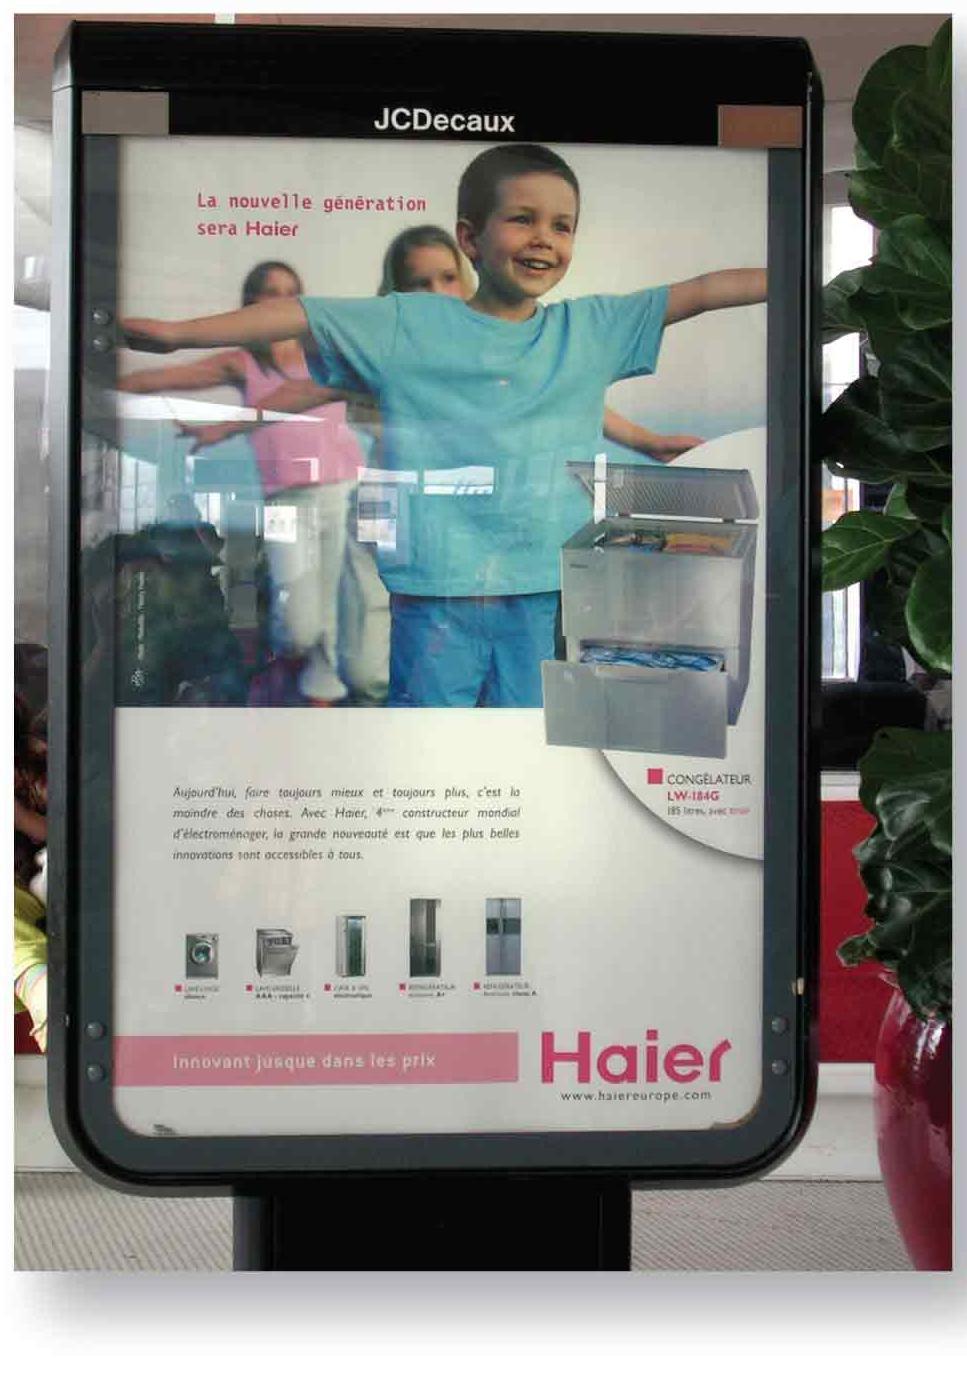 Business Unit Strategic Planning feedback and control Marketplace will change review & revise implementation, programs, strategies or objectives HAIER is a good example: Started with inferior-quality